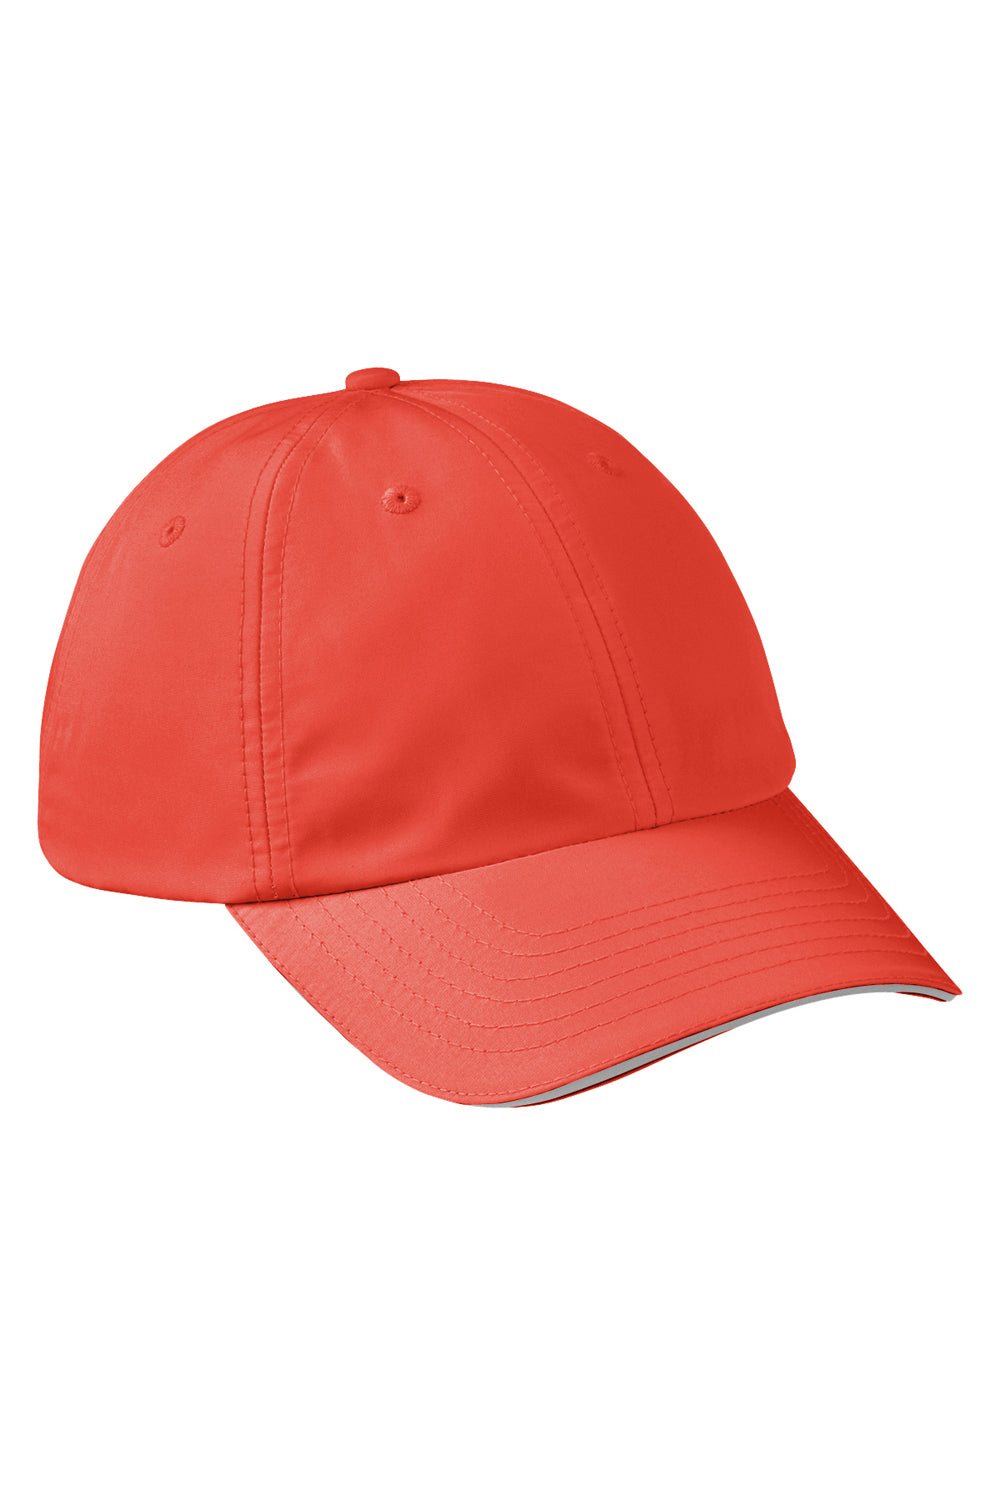 Core 365 CE001 Mens Pitch Performance Moisture Wicking Adjustable Hat Orange Front